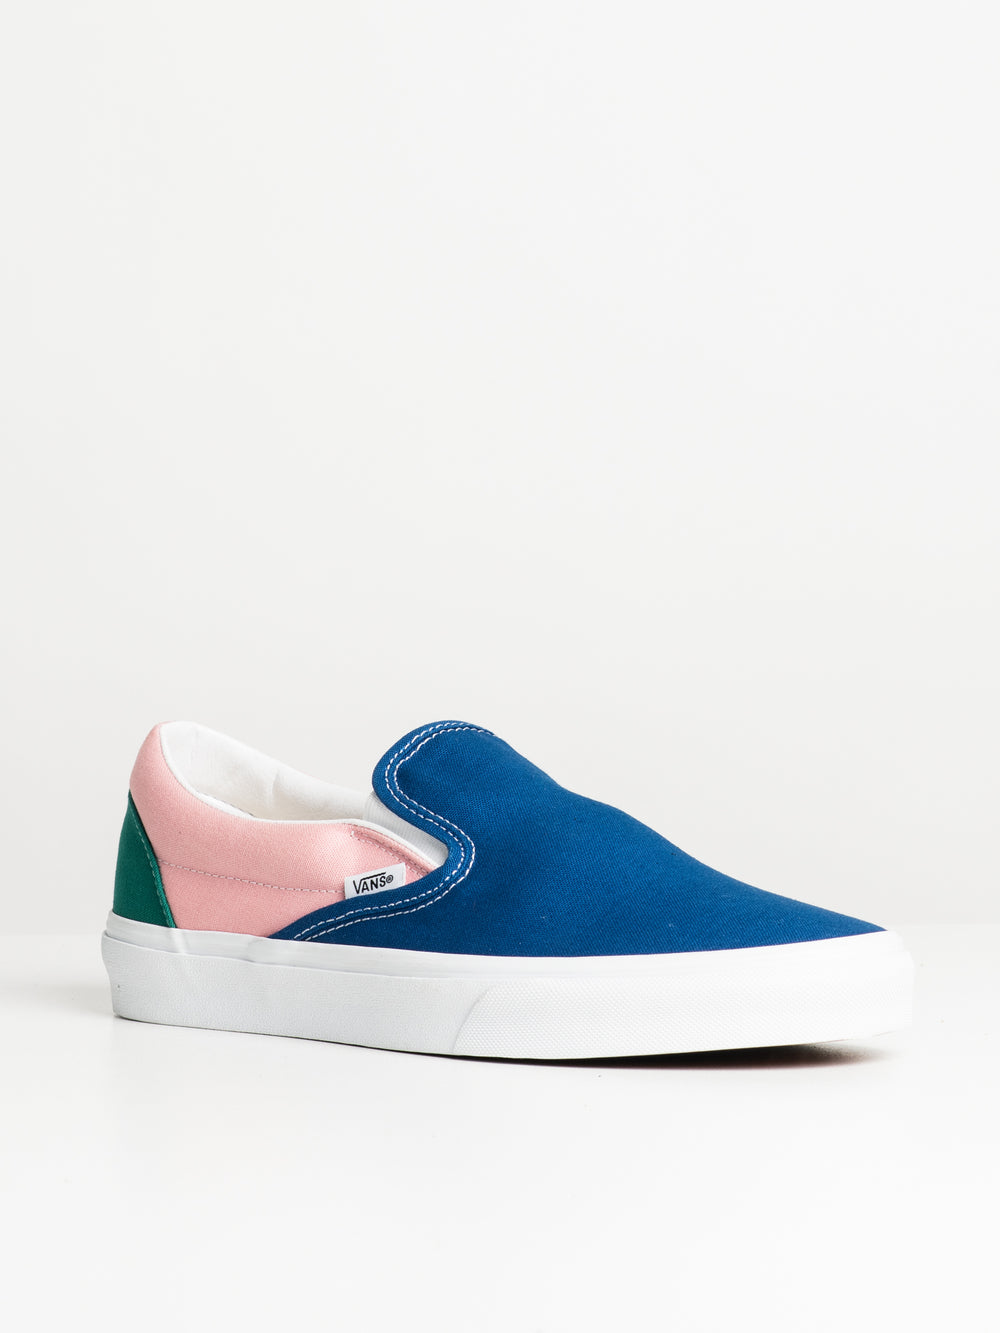 WOMENS VANS CL SLIP-ON RETRO COURT - CLEARANCE